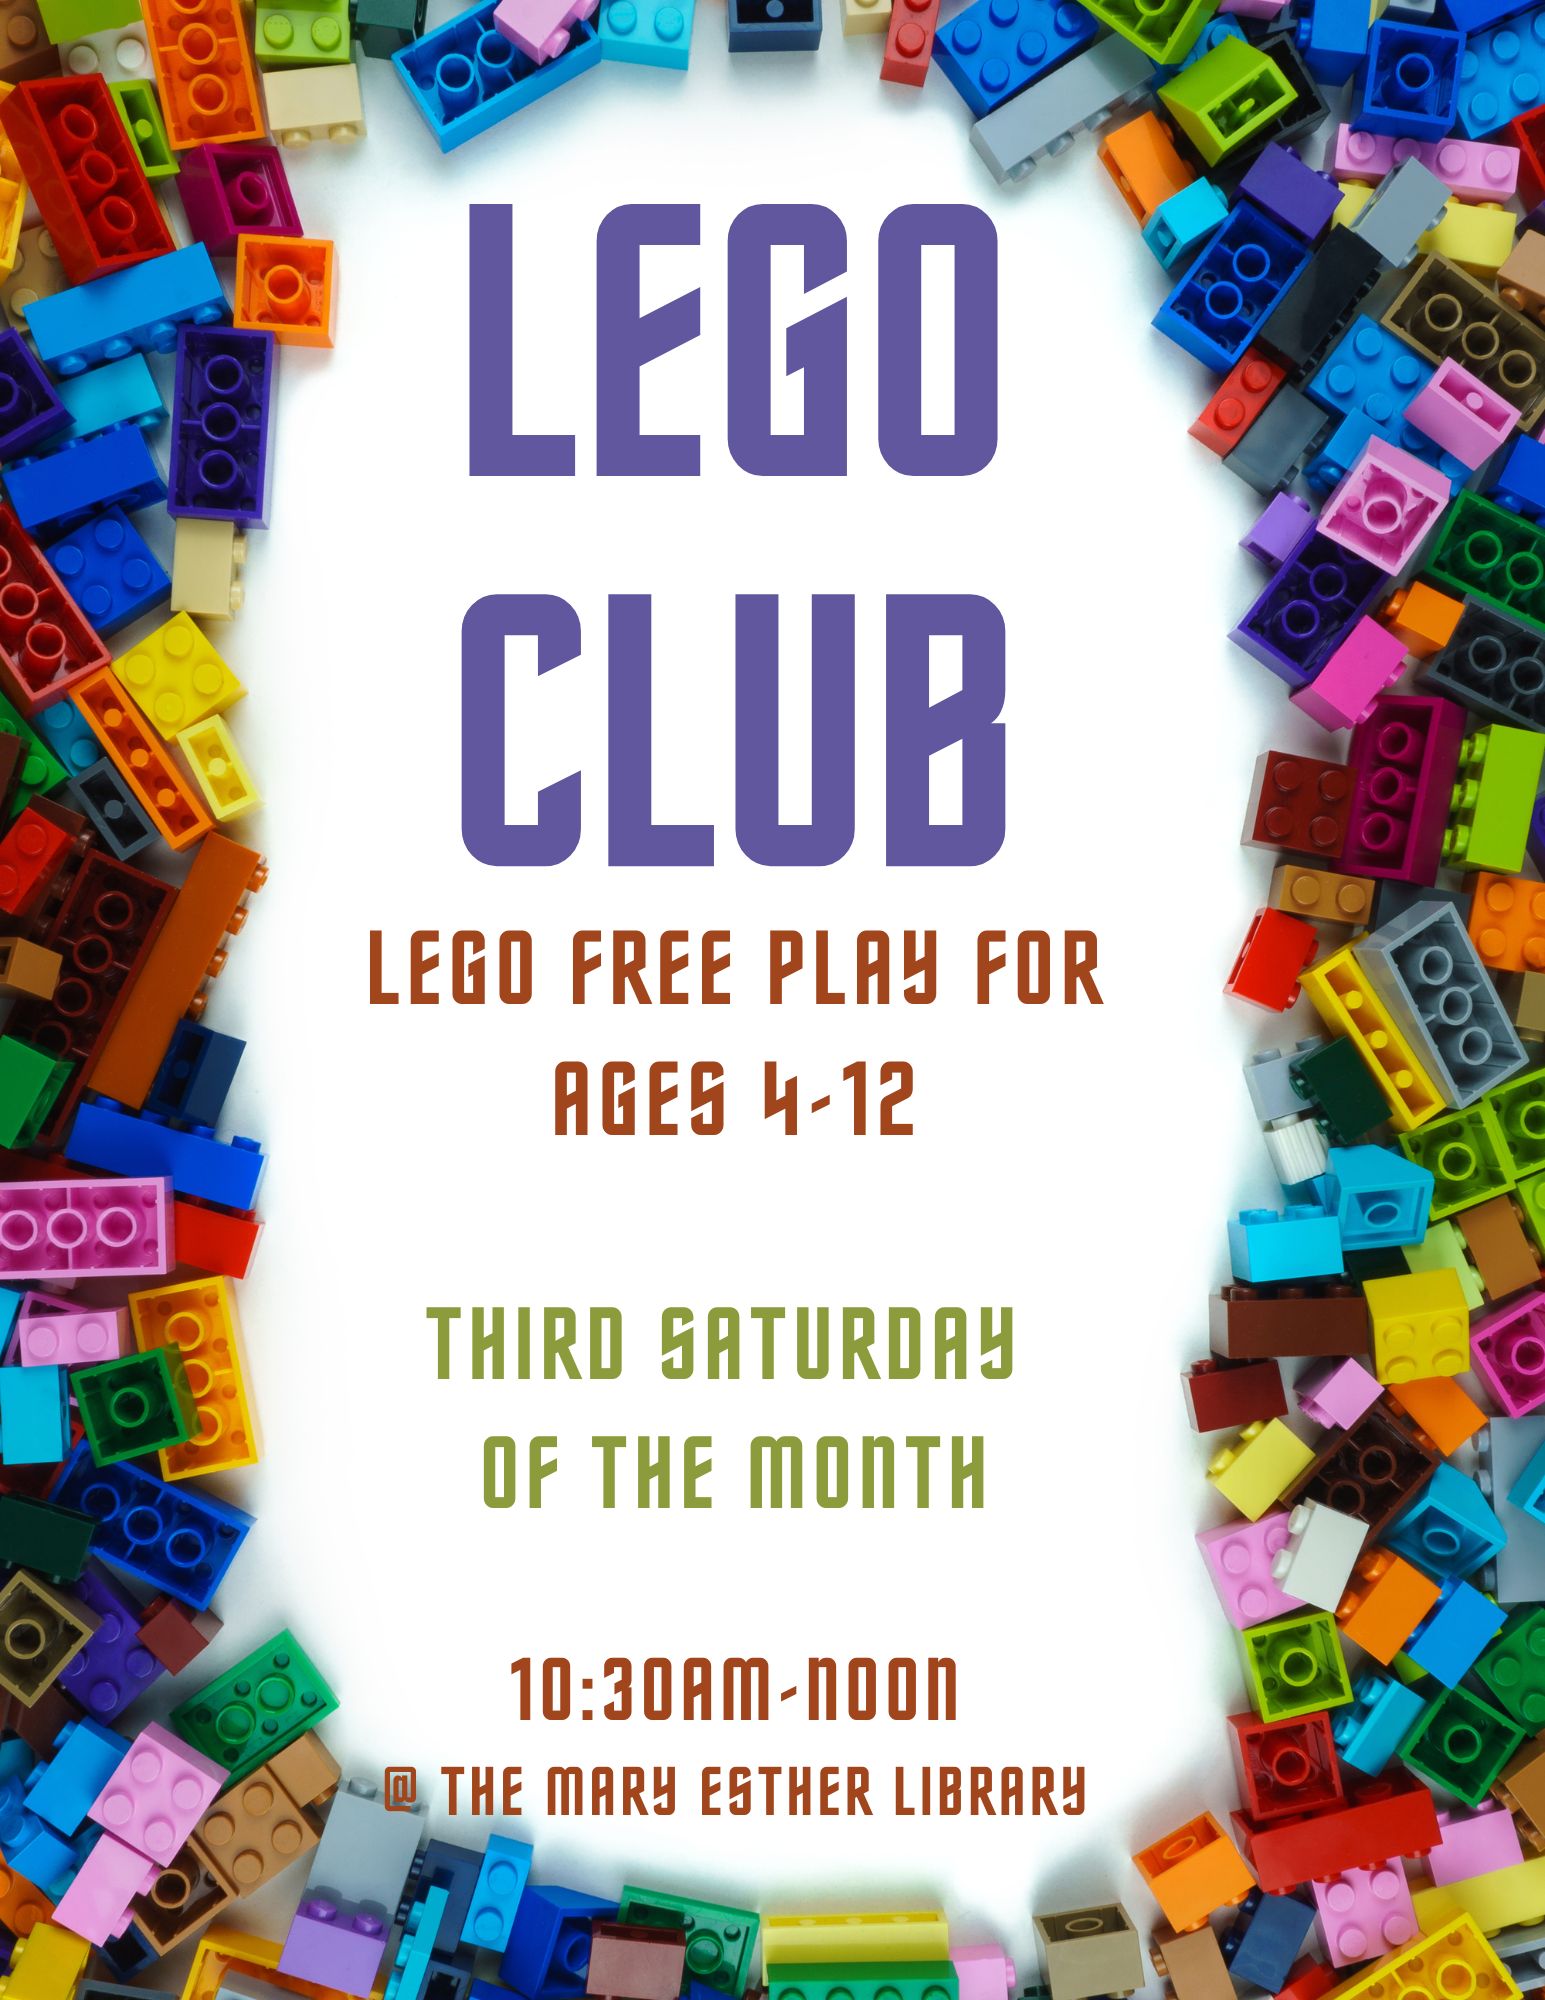 LEGO CLUB FOR AGES 4-12 THIRD SATURDAY OF THE MONTH 10:30AM TO NOON